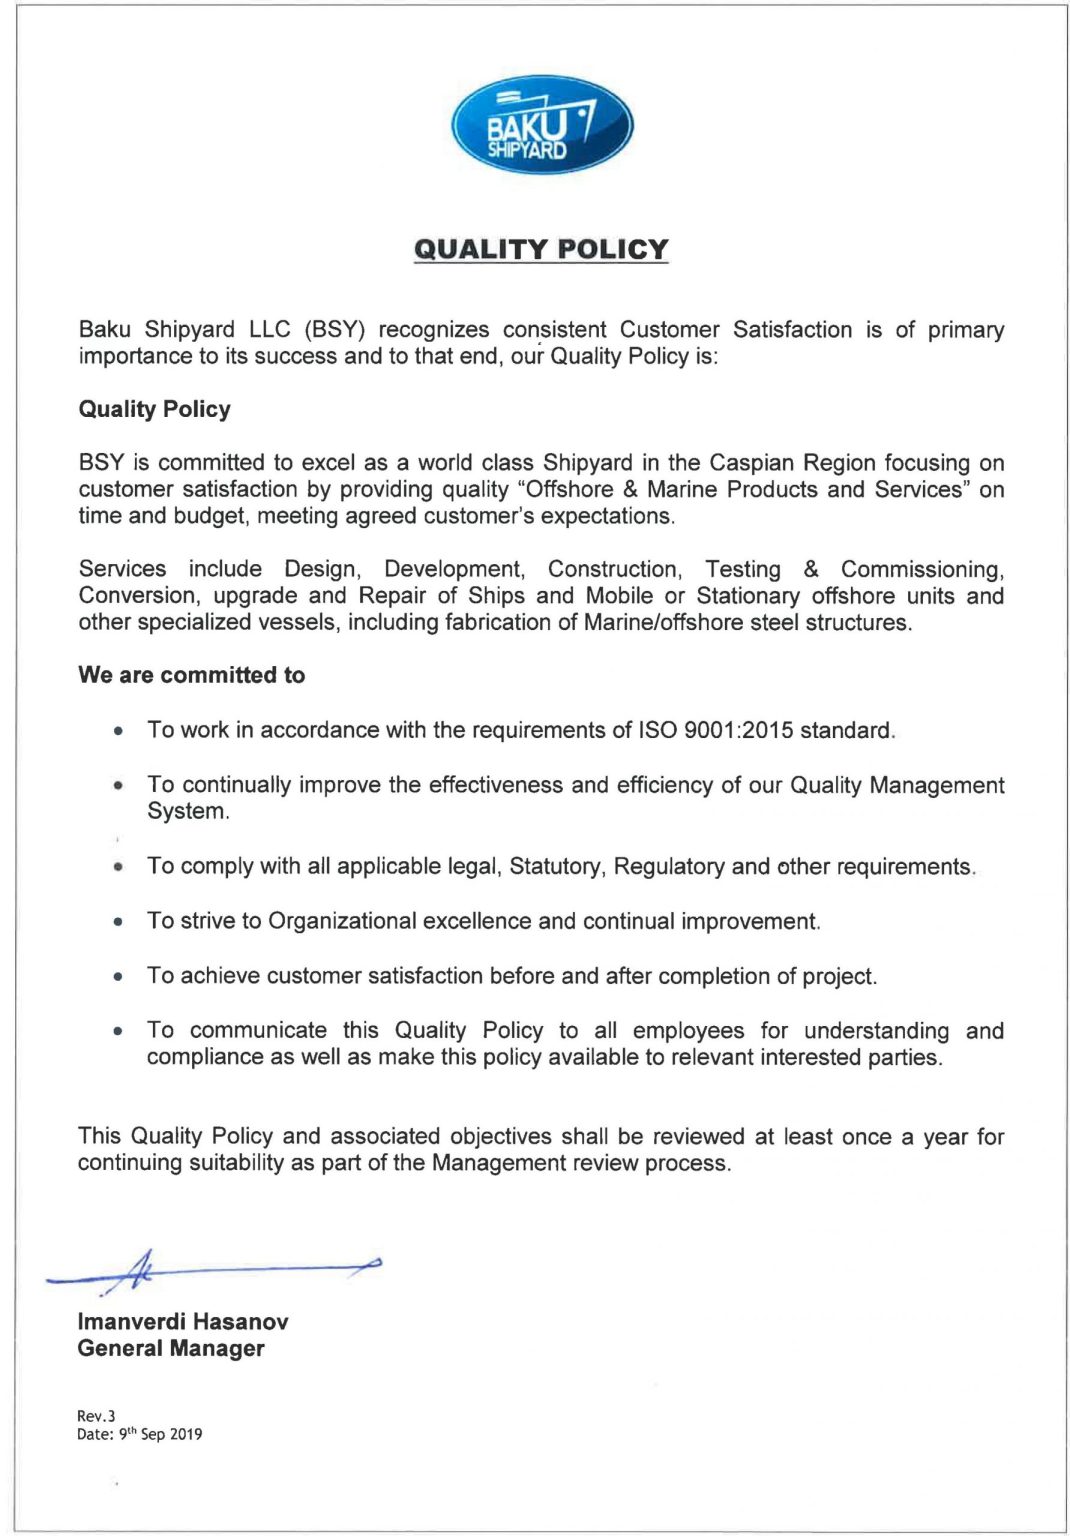 Quality-Policy-Rev-3-En-scaled-1